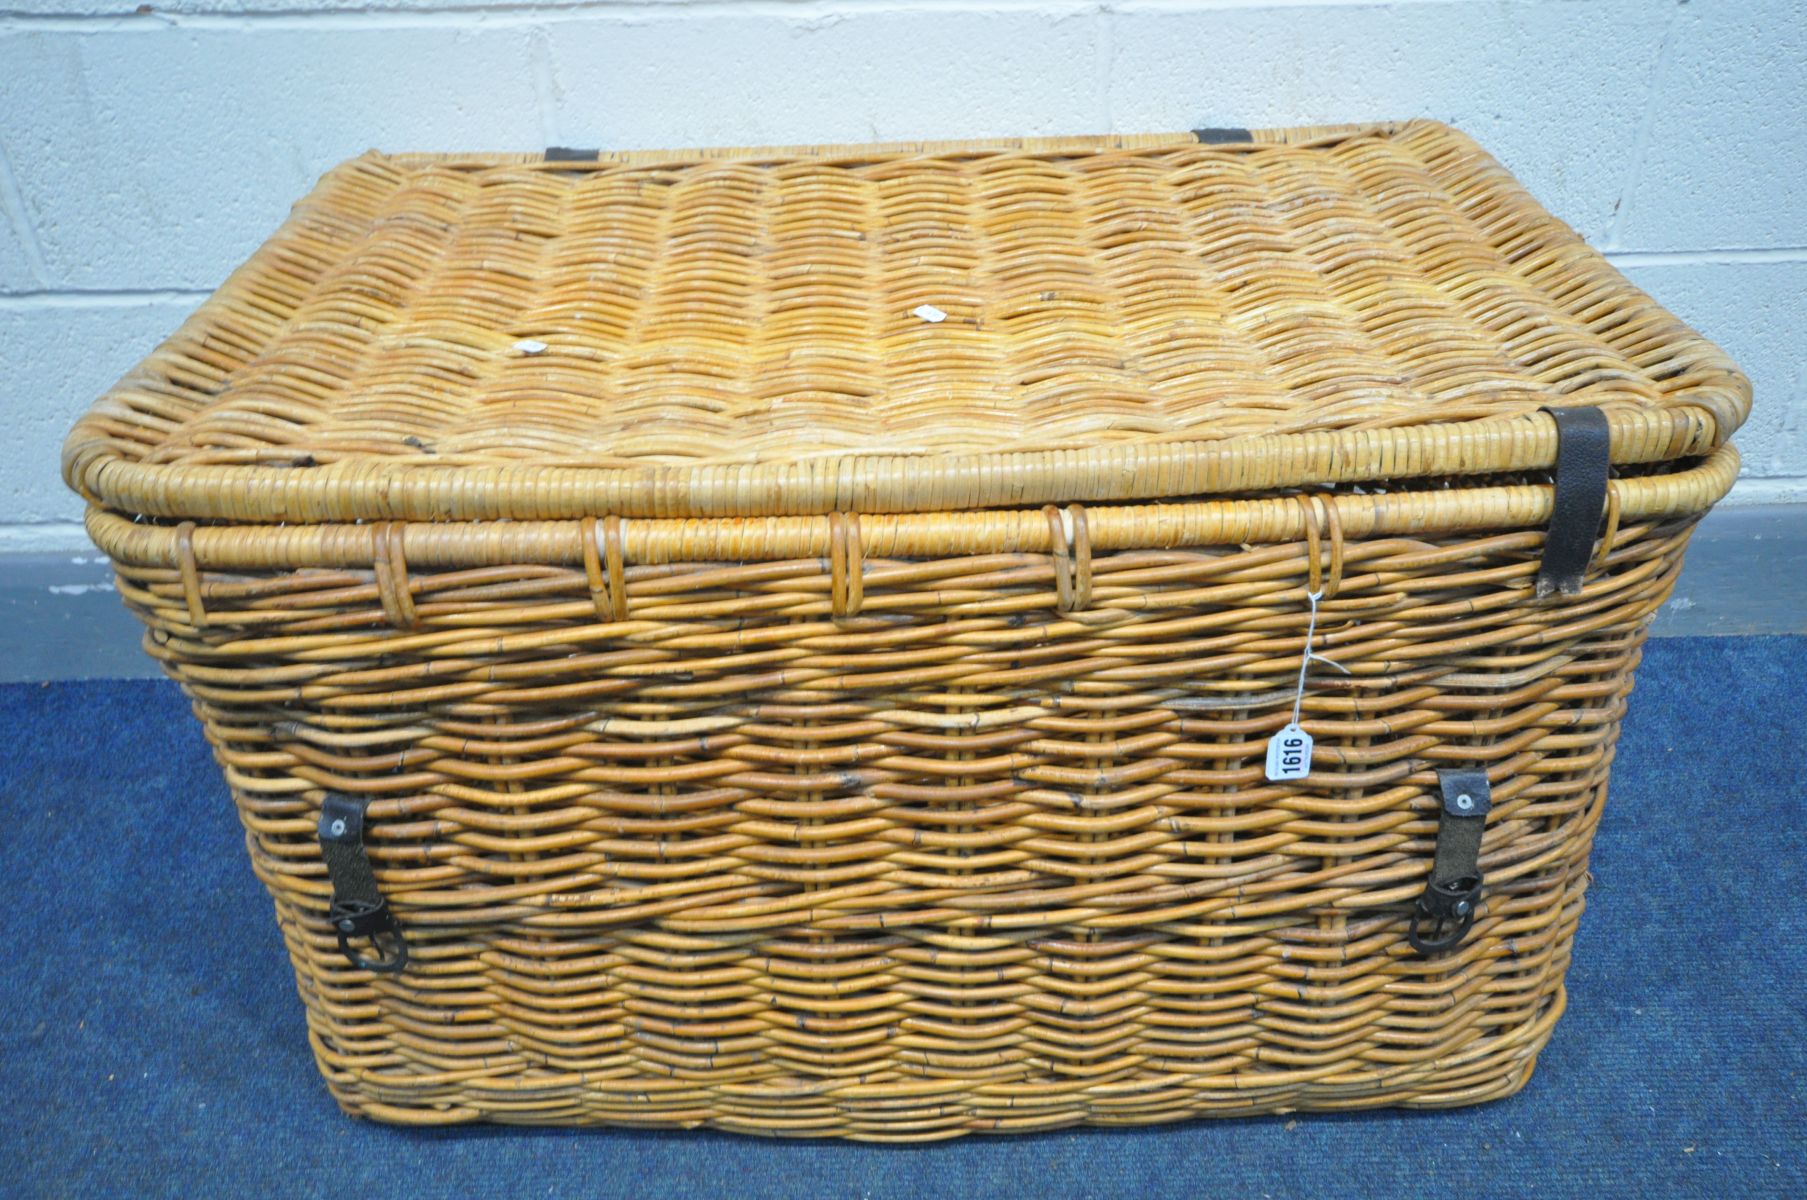 A LARGE WICKER BASKET, with handles, width 90cm x depth 58cm x height 53cm (condition:-leather